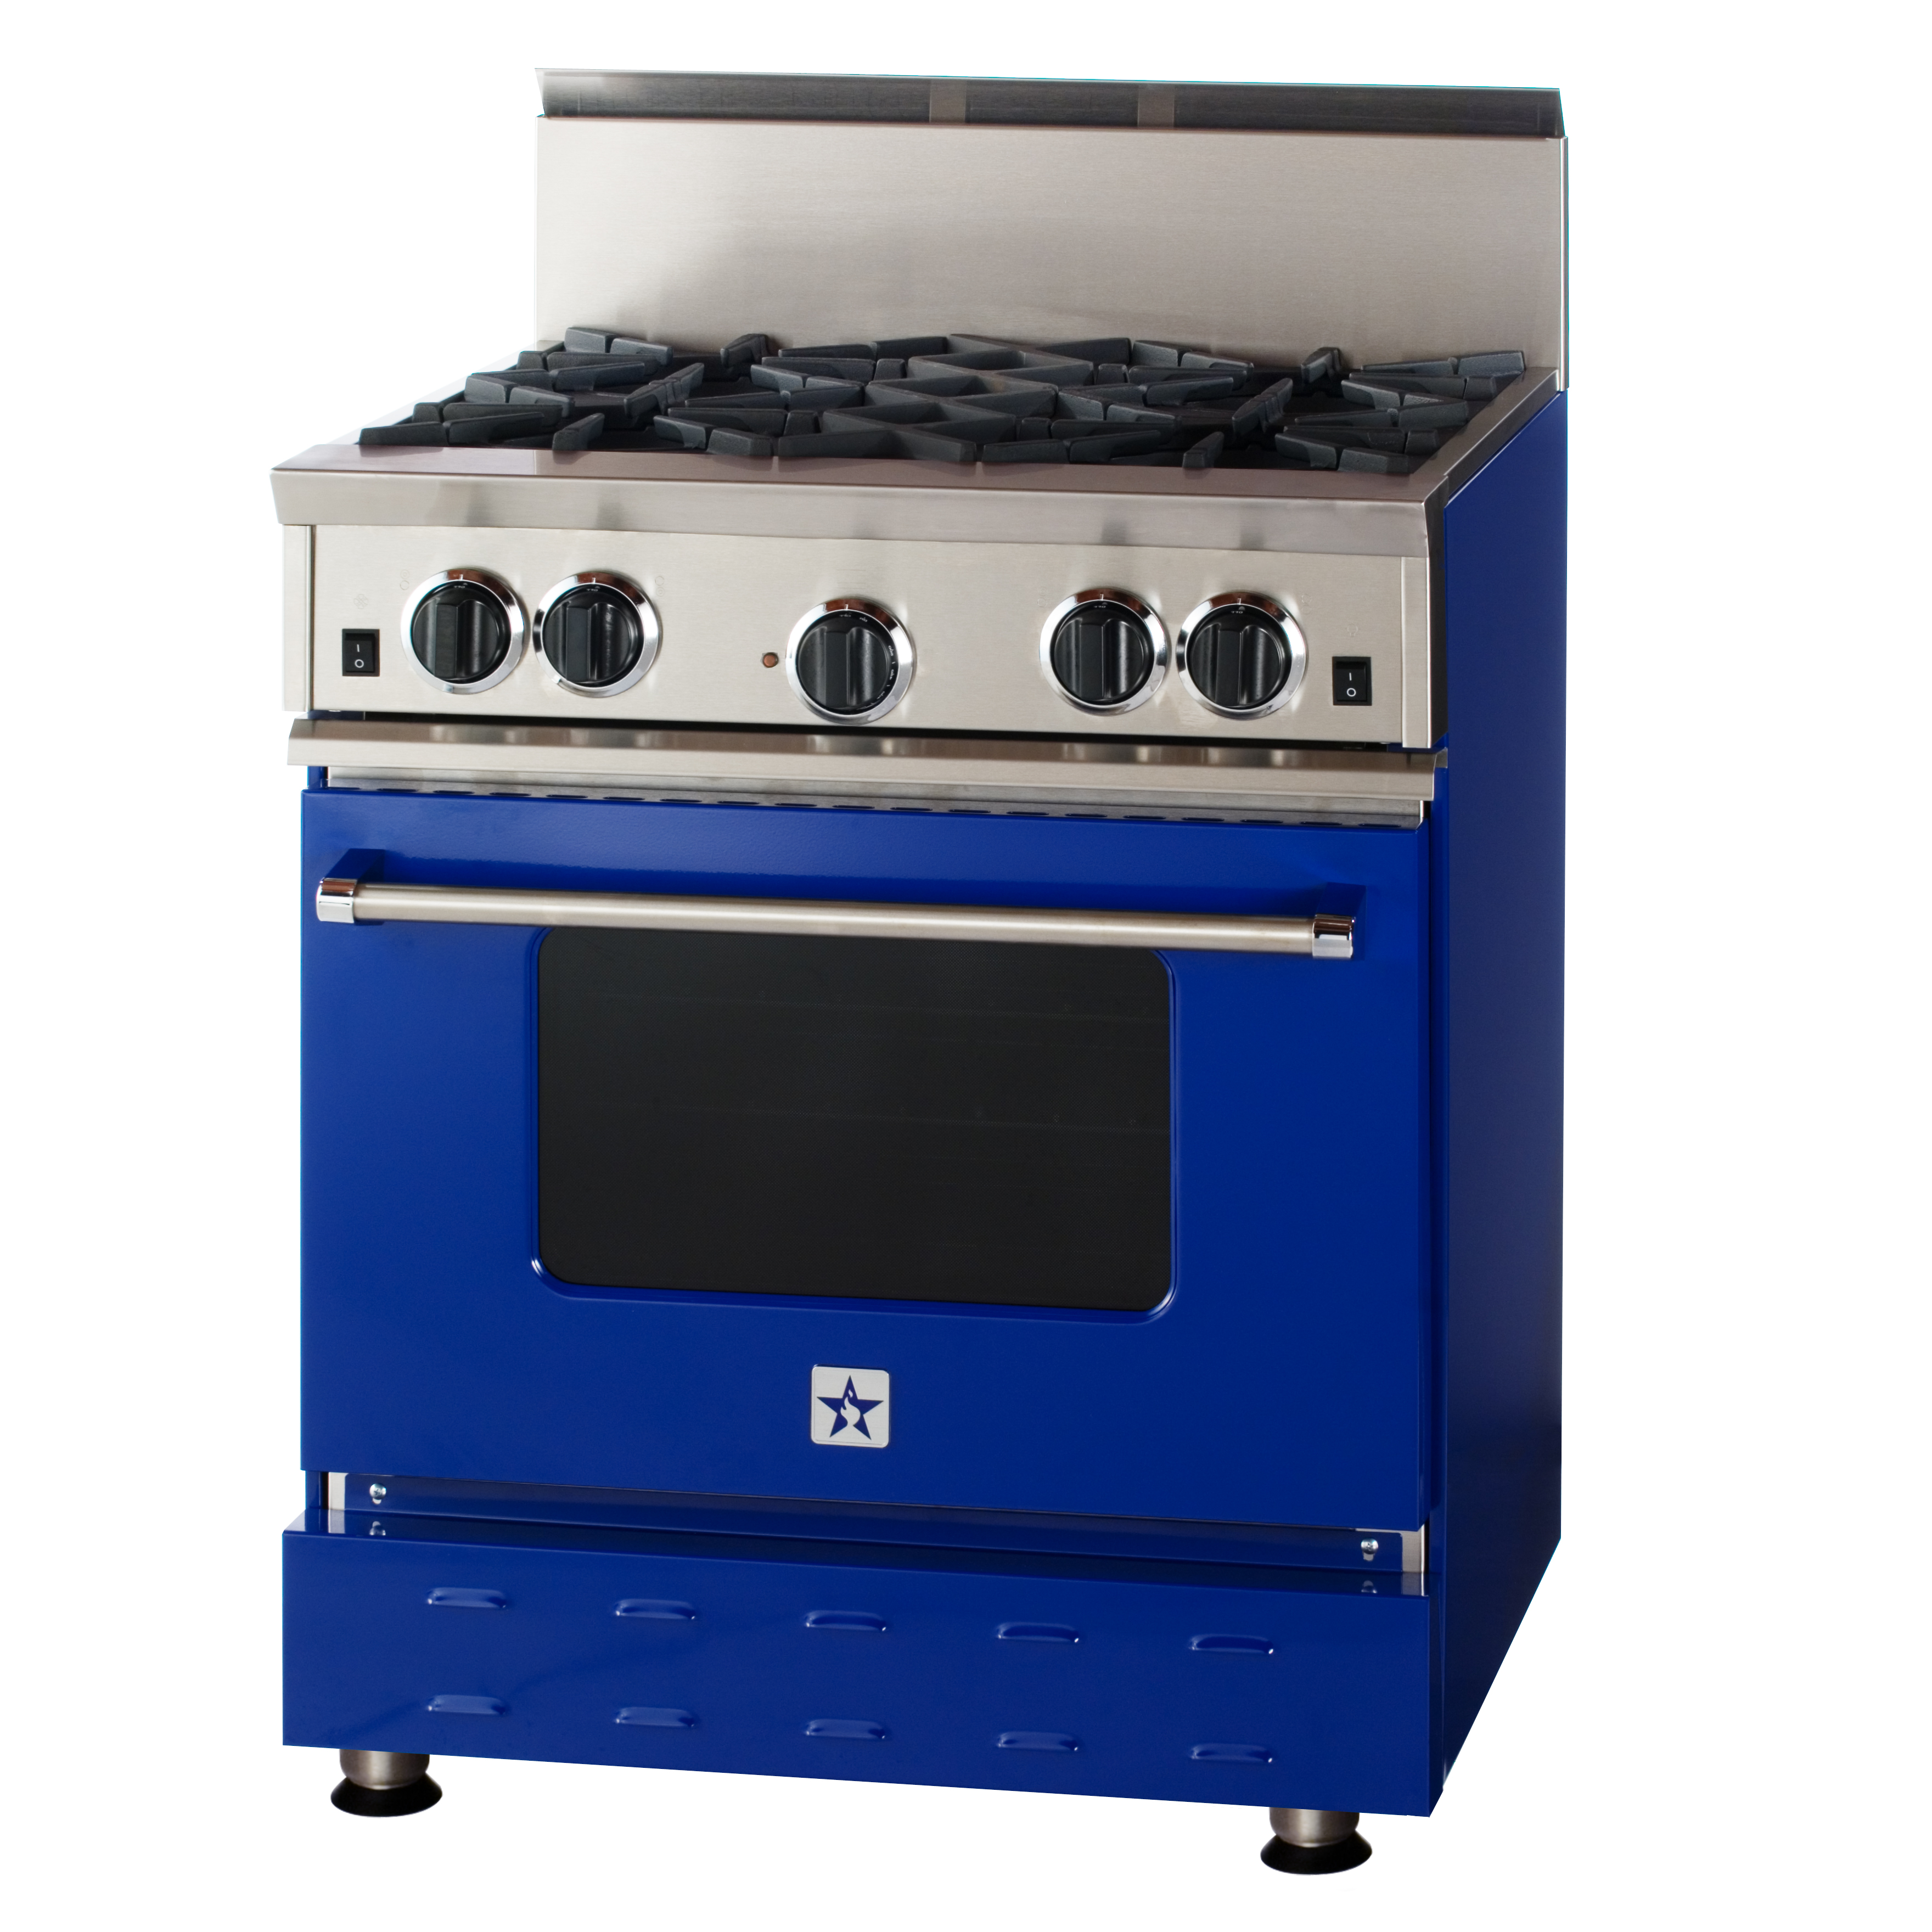 Since 1880, BlueStar® has manufactured restaurant-quality, customizable ranges for the home chef, available in over 750 colors and finishes